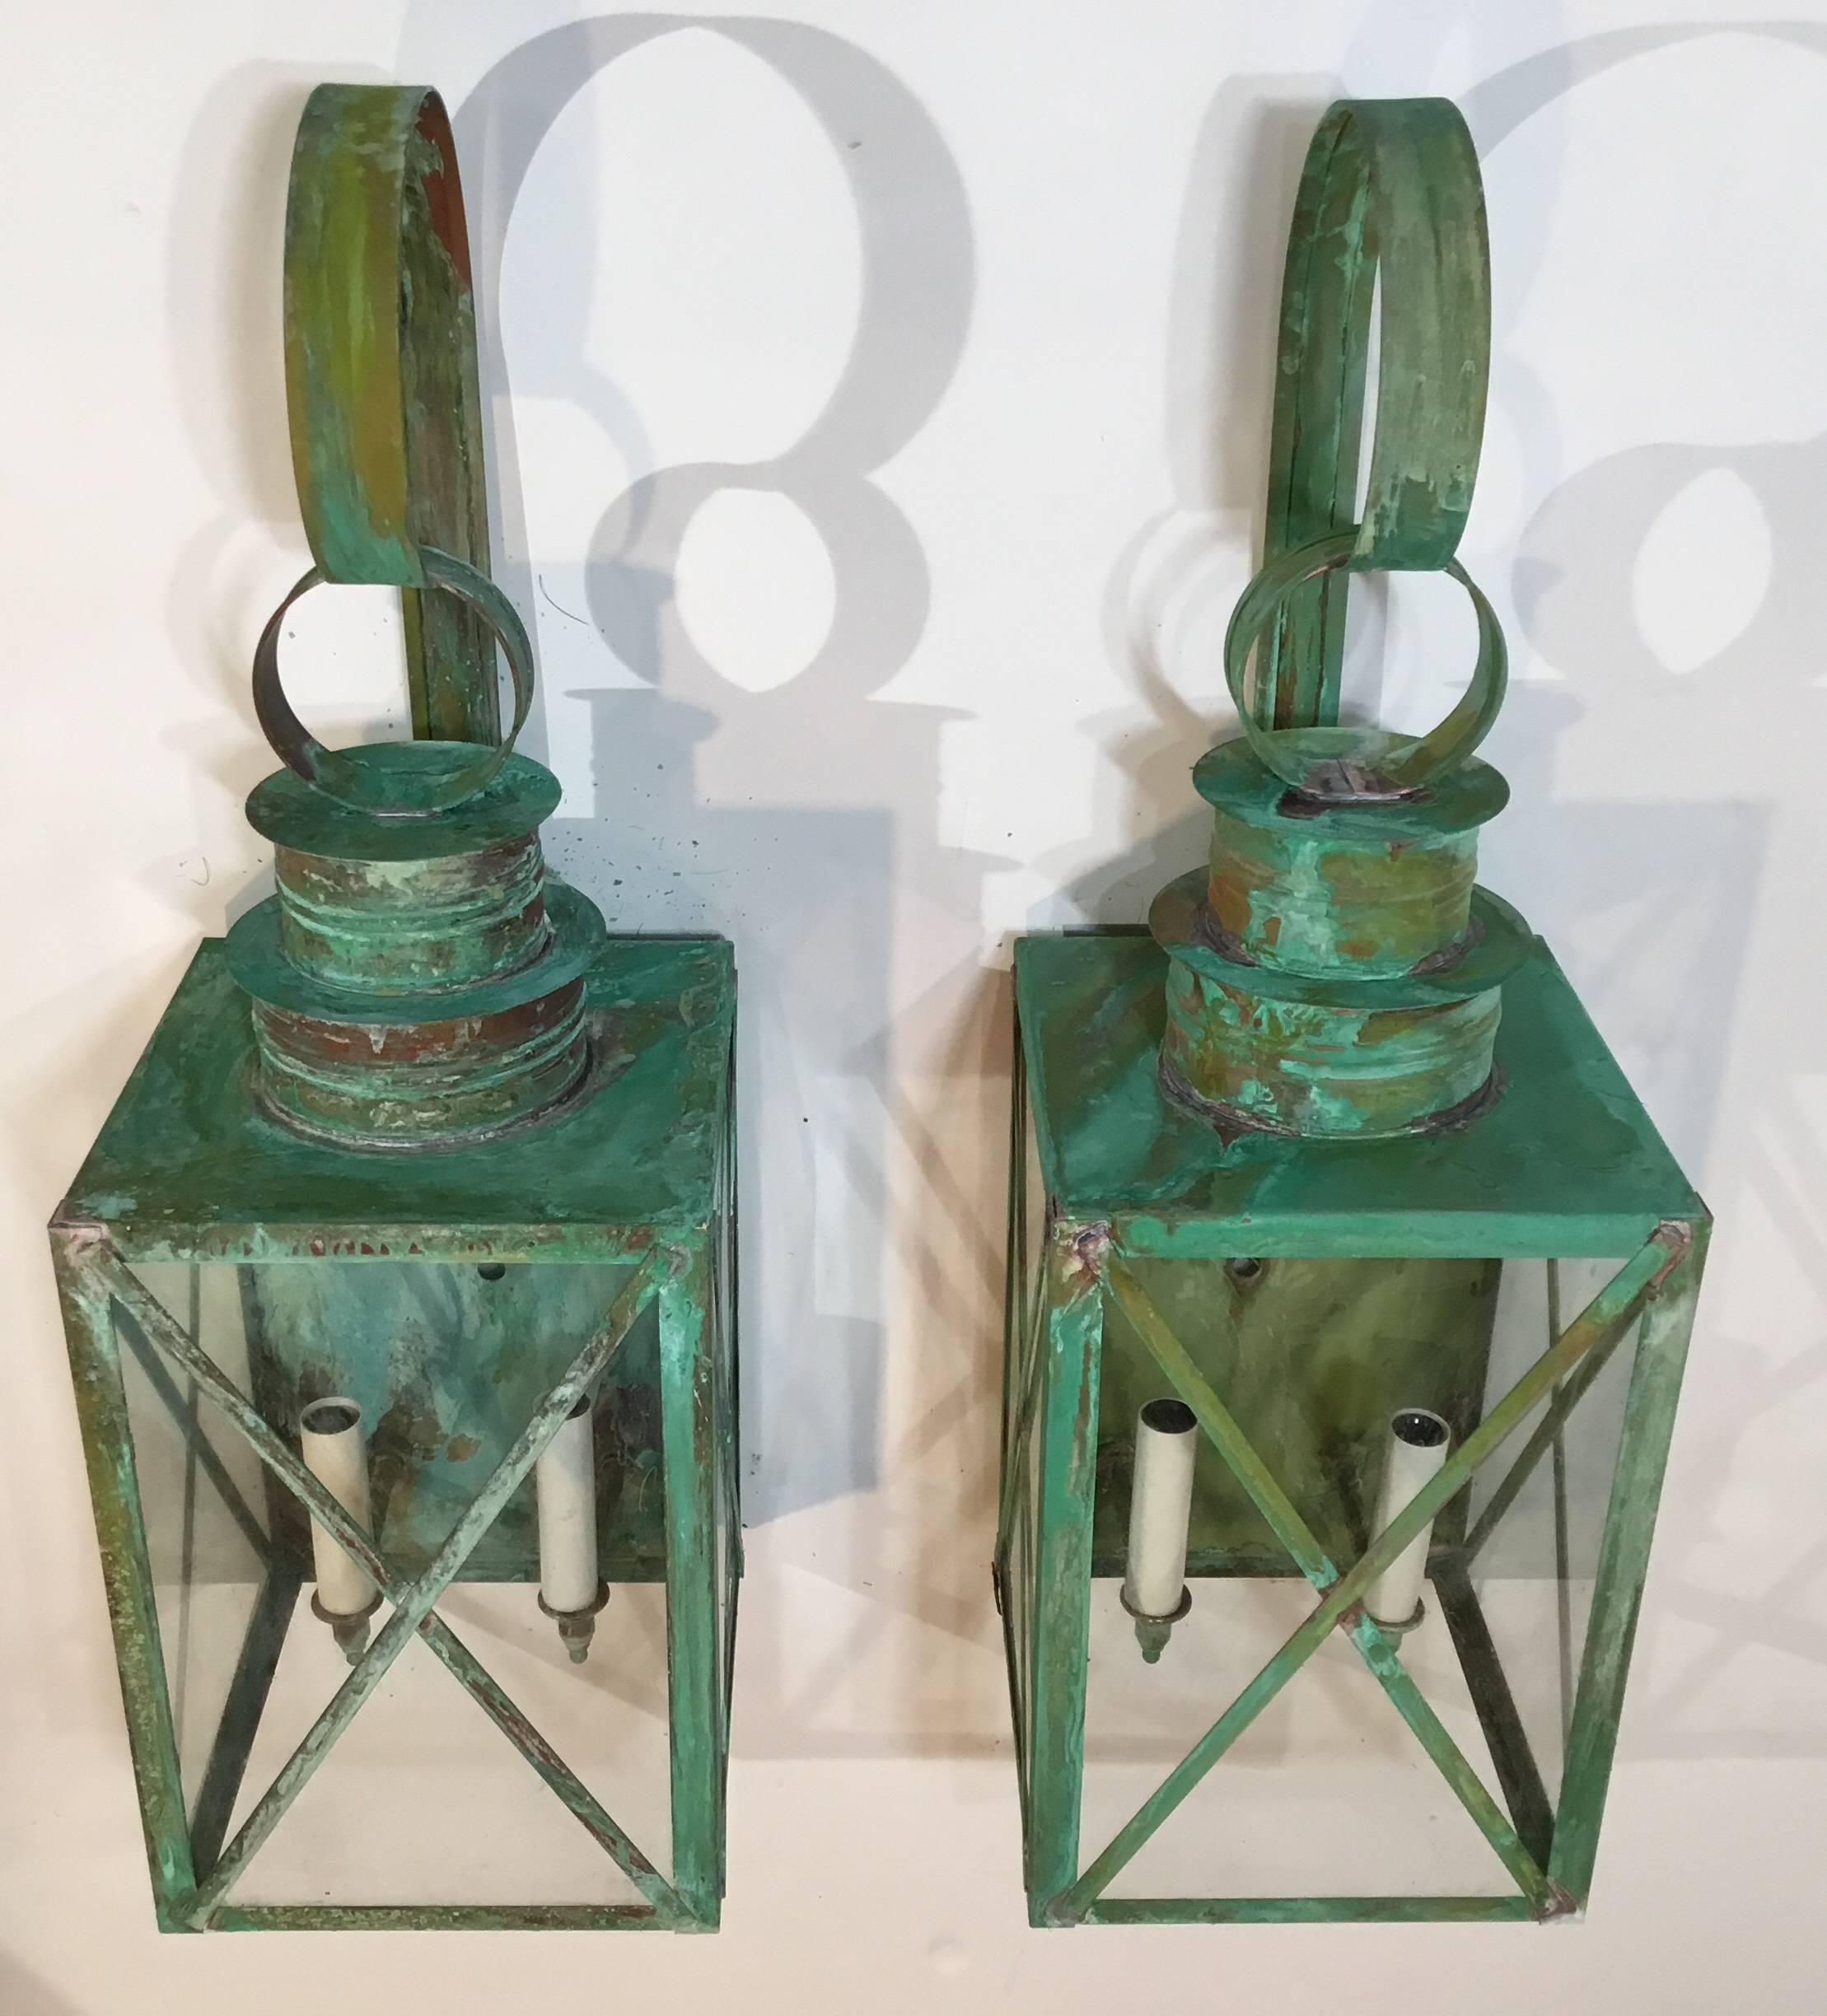 Pair of Architectural Wall Hanging Copper Lantern  1